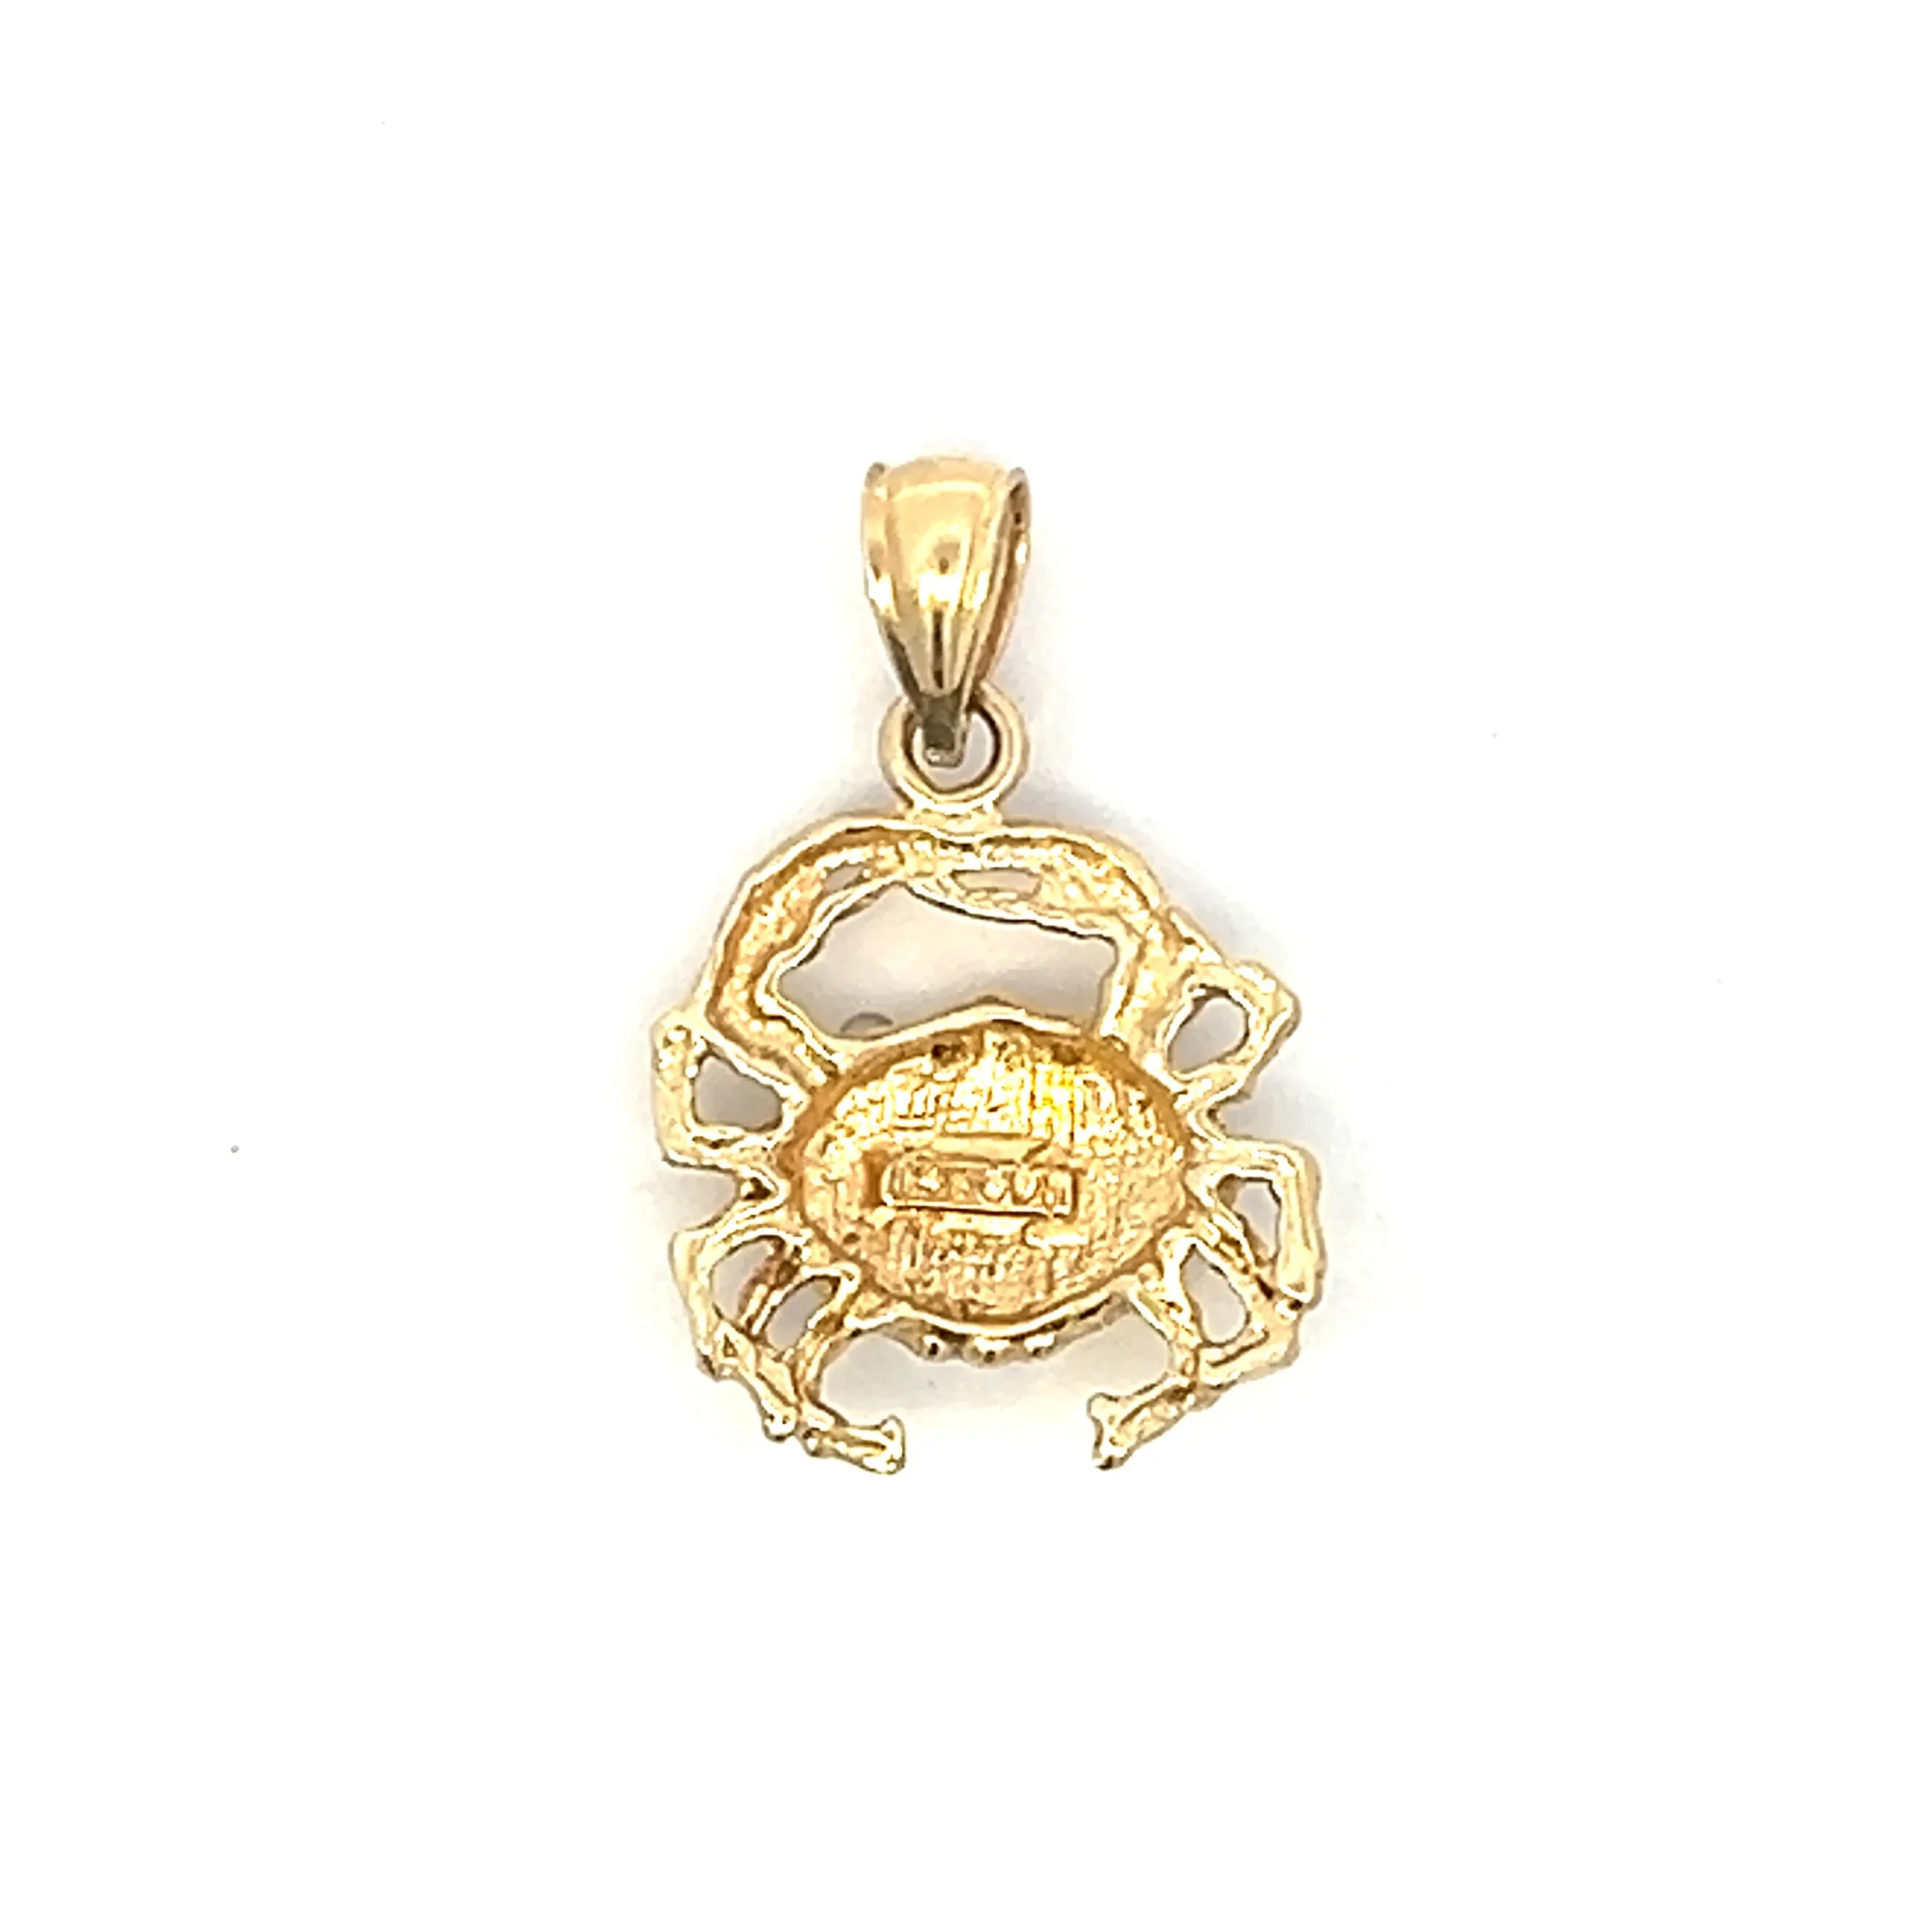 Estate Gold Crab Charm in 14K yellow gold with a polished finish and intricate crab design.